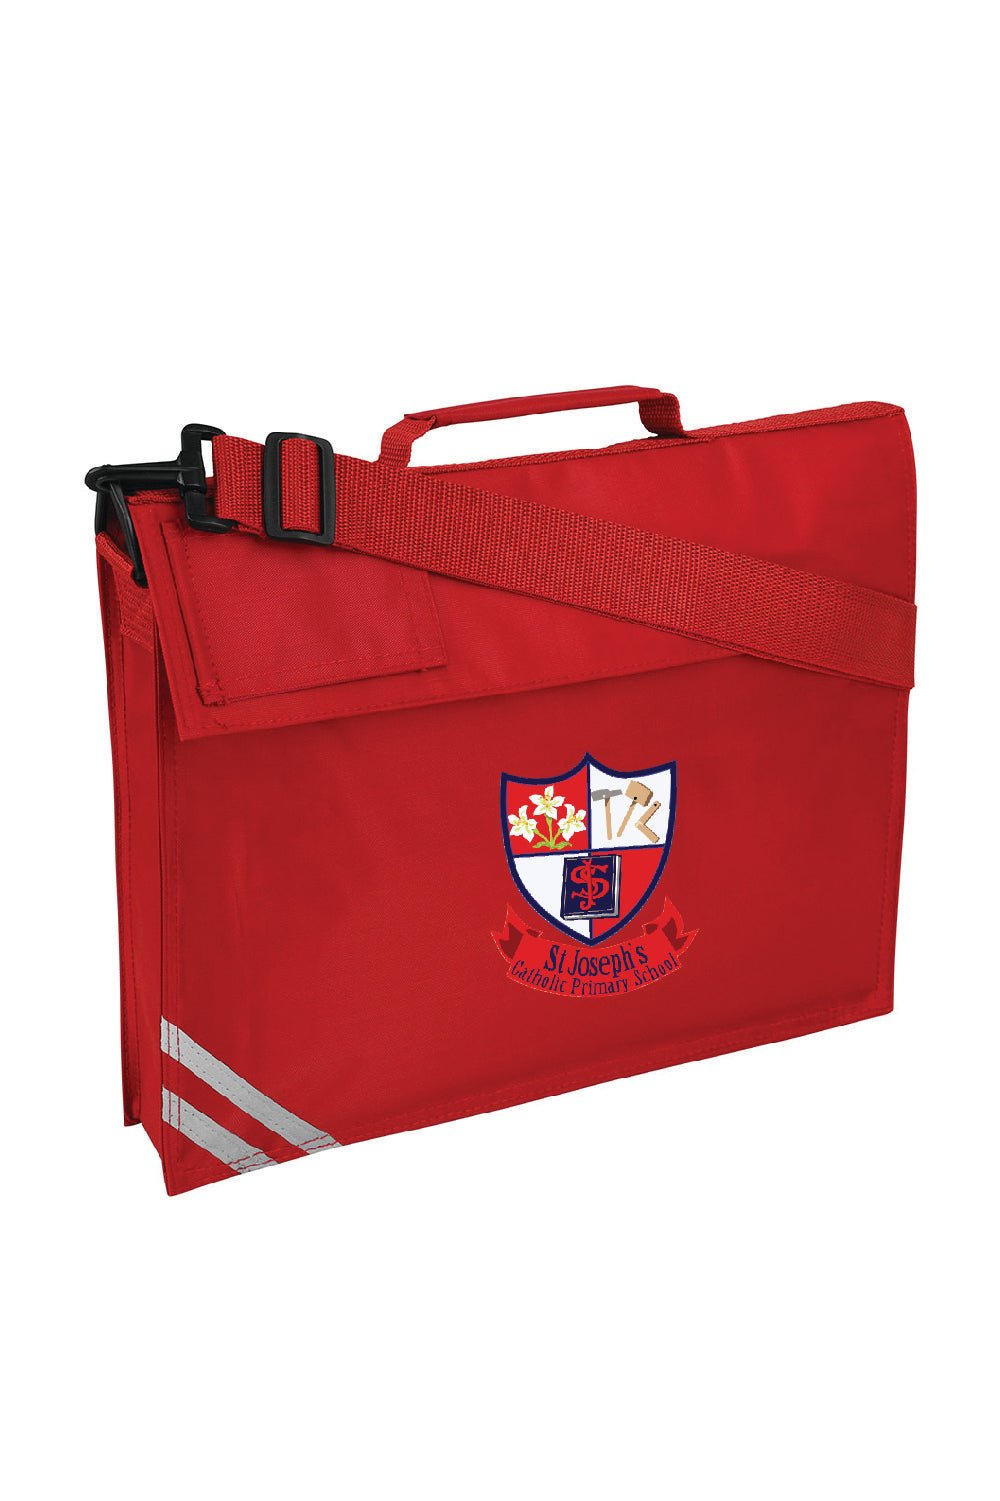 S.J Book bag with personalisation - Uniformwise Schoolwear